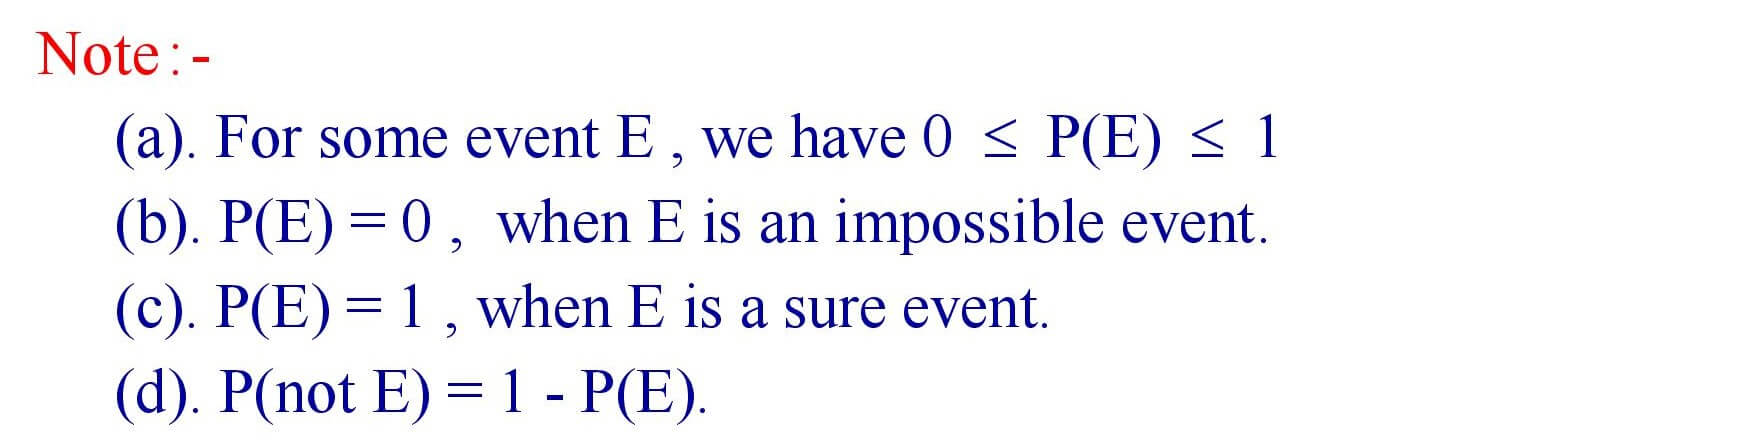 Basic concepts of probability